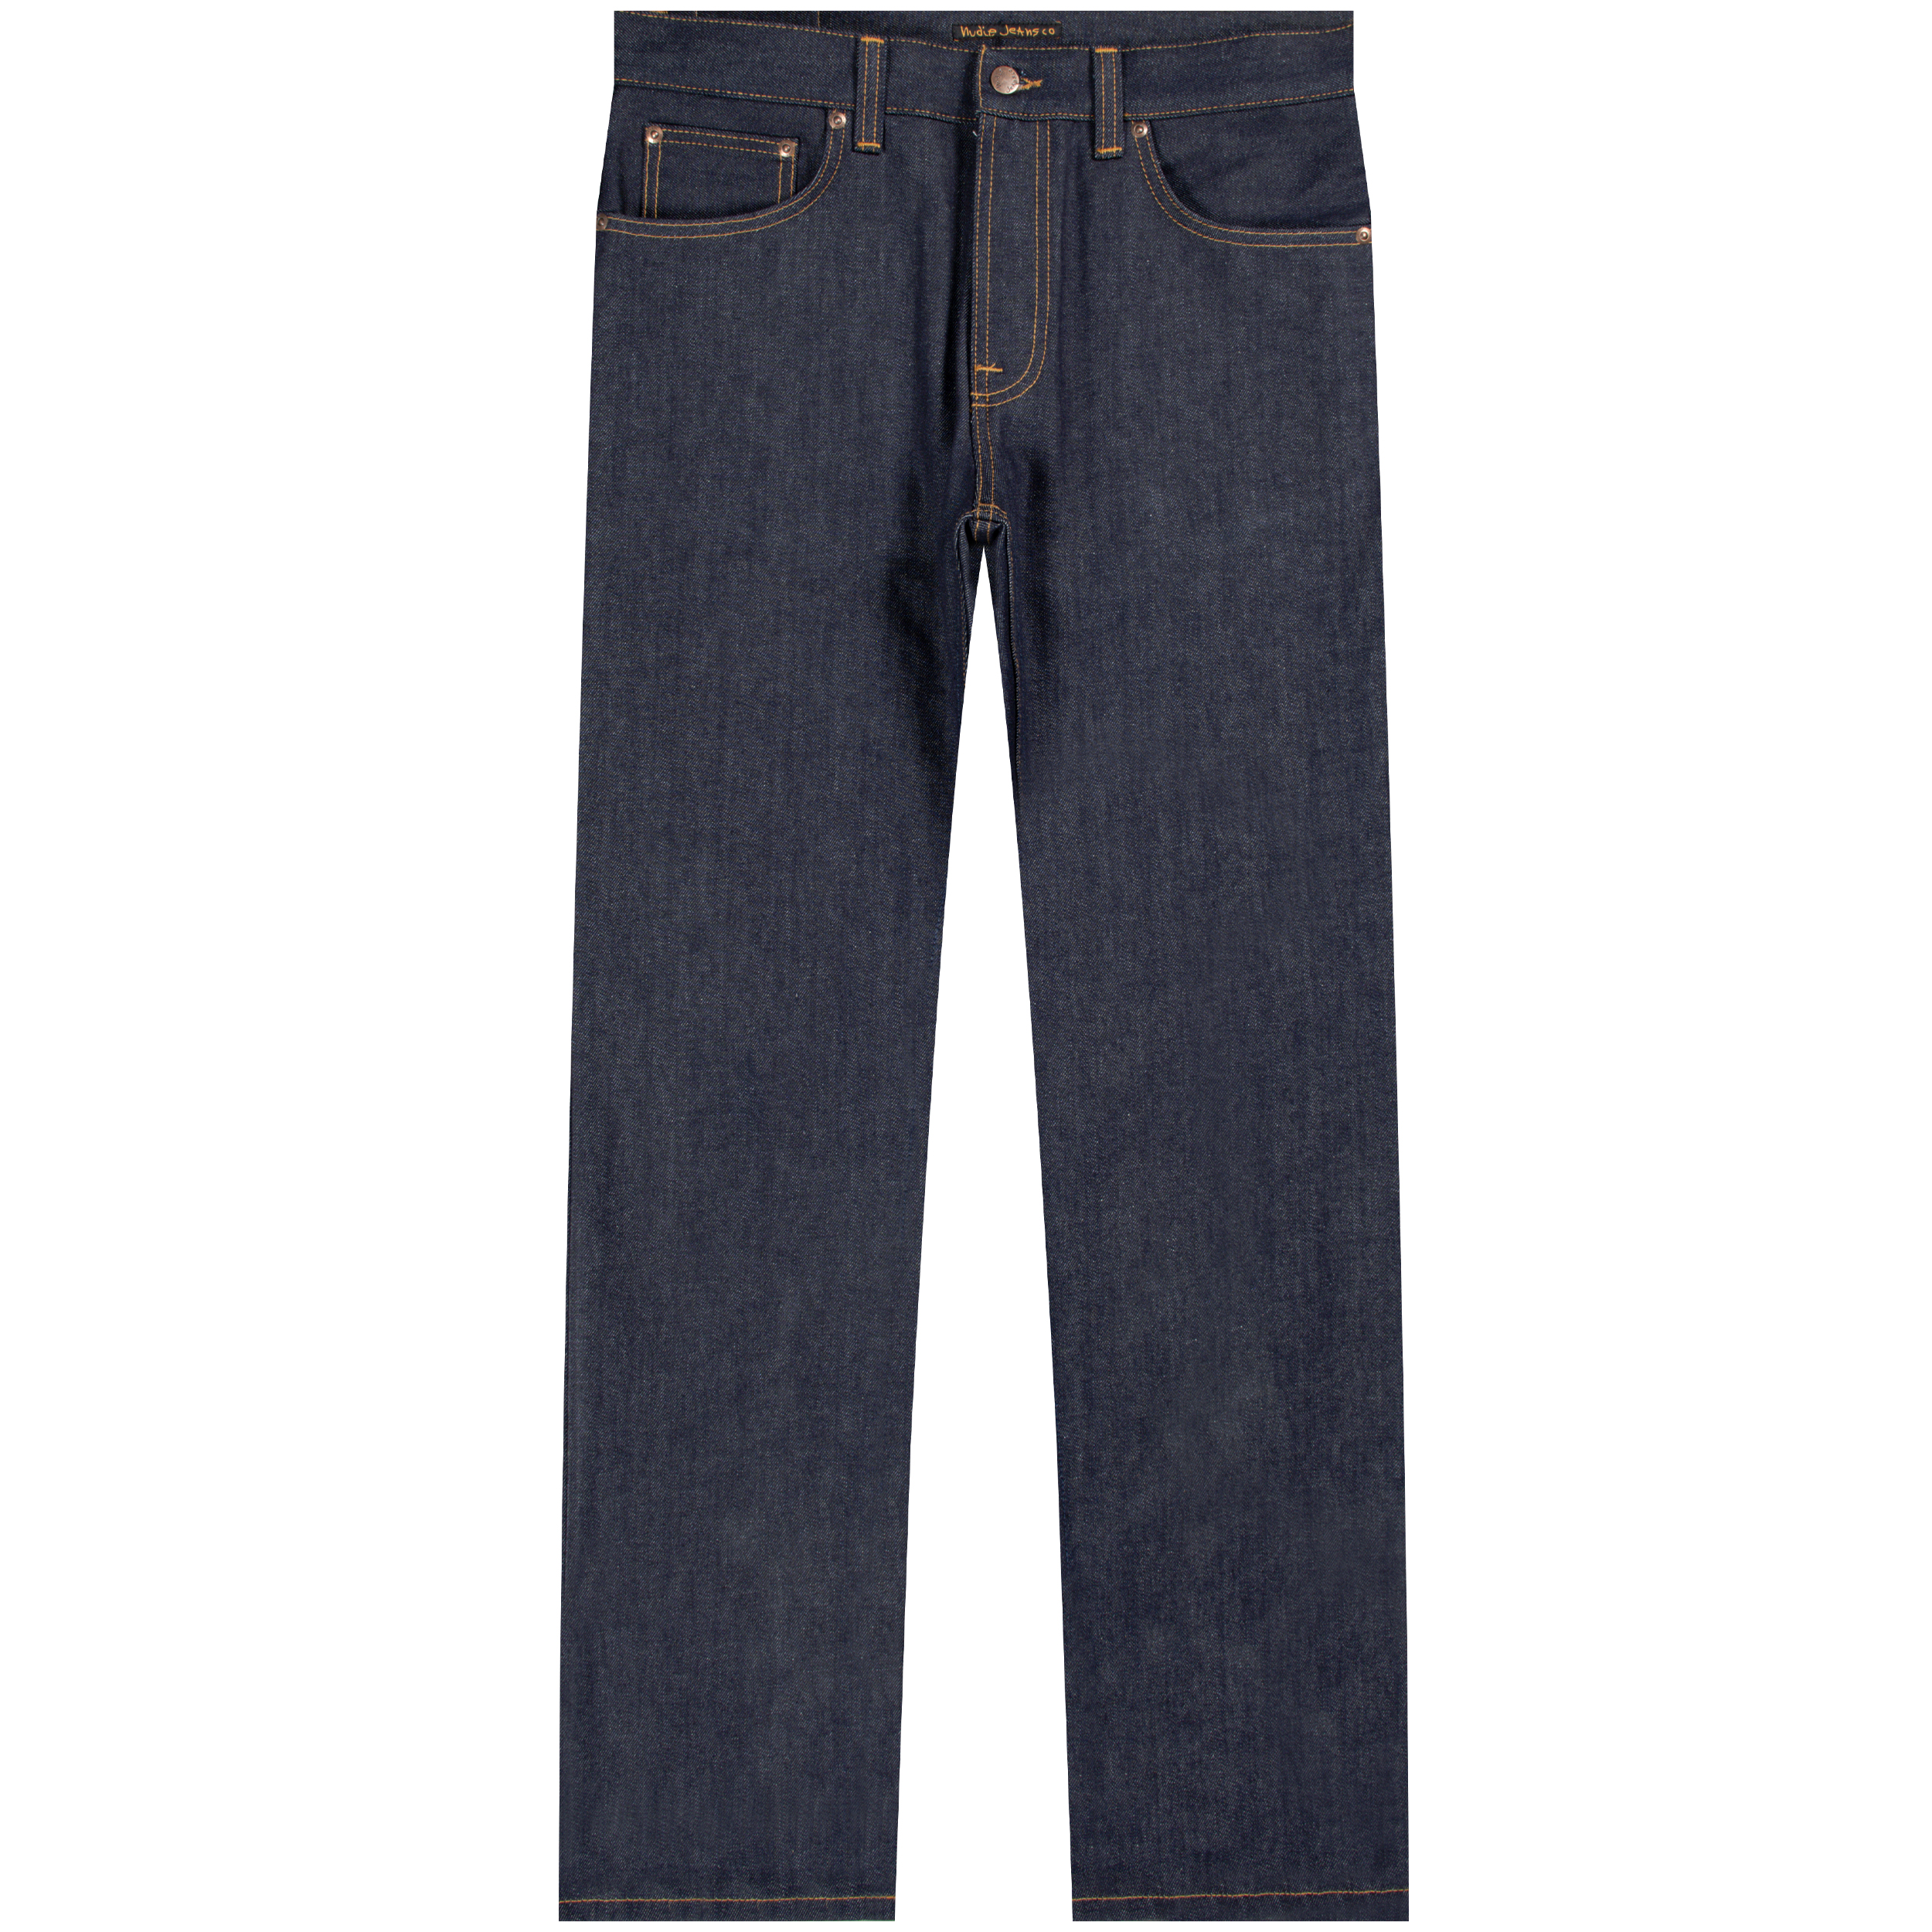 Nudie ’Gritty Jackson’ Dry Classic Jean Navy